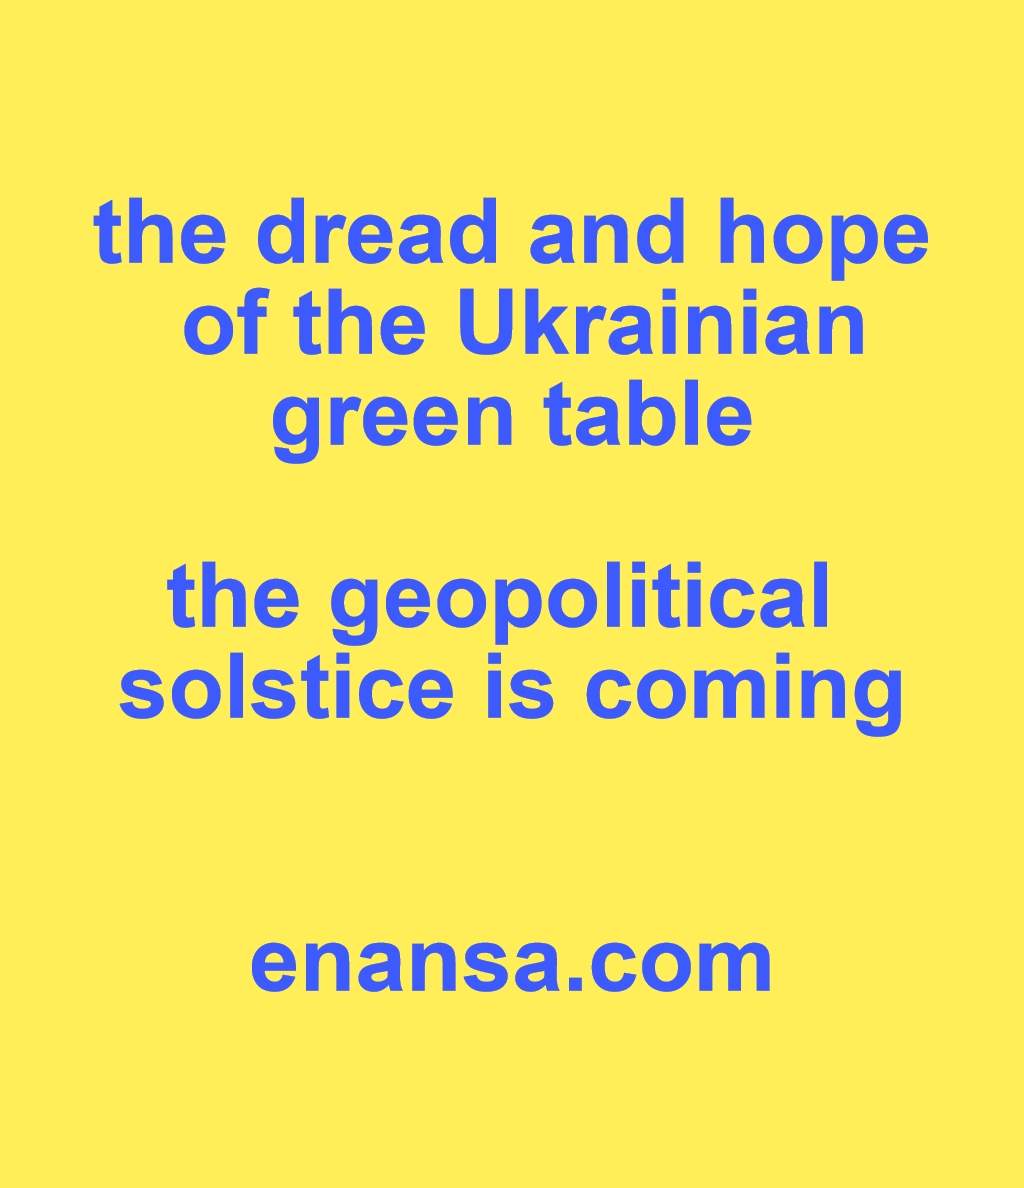 the Ukrainian green table is coming